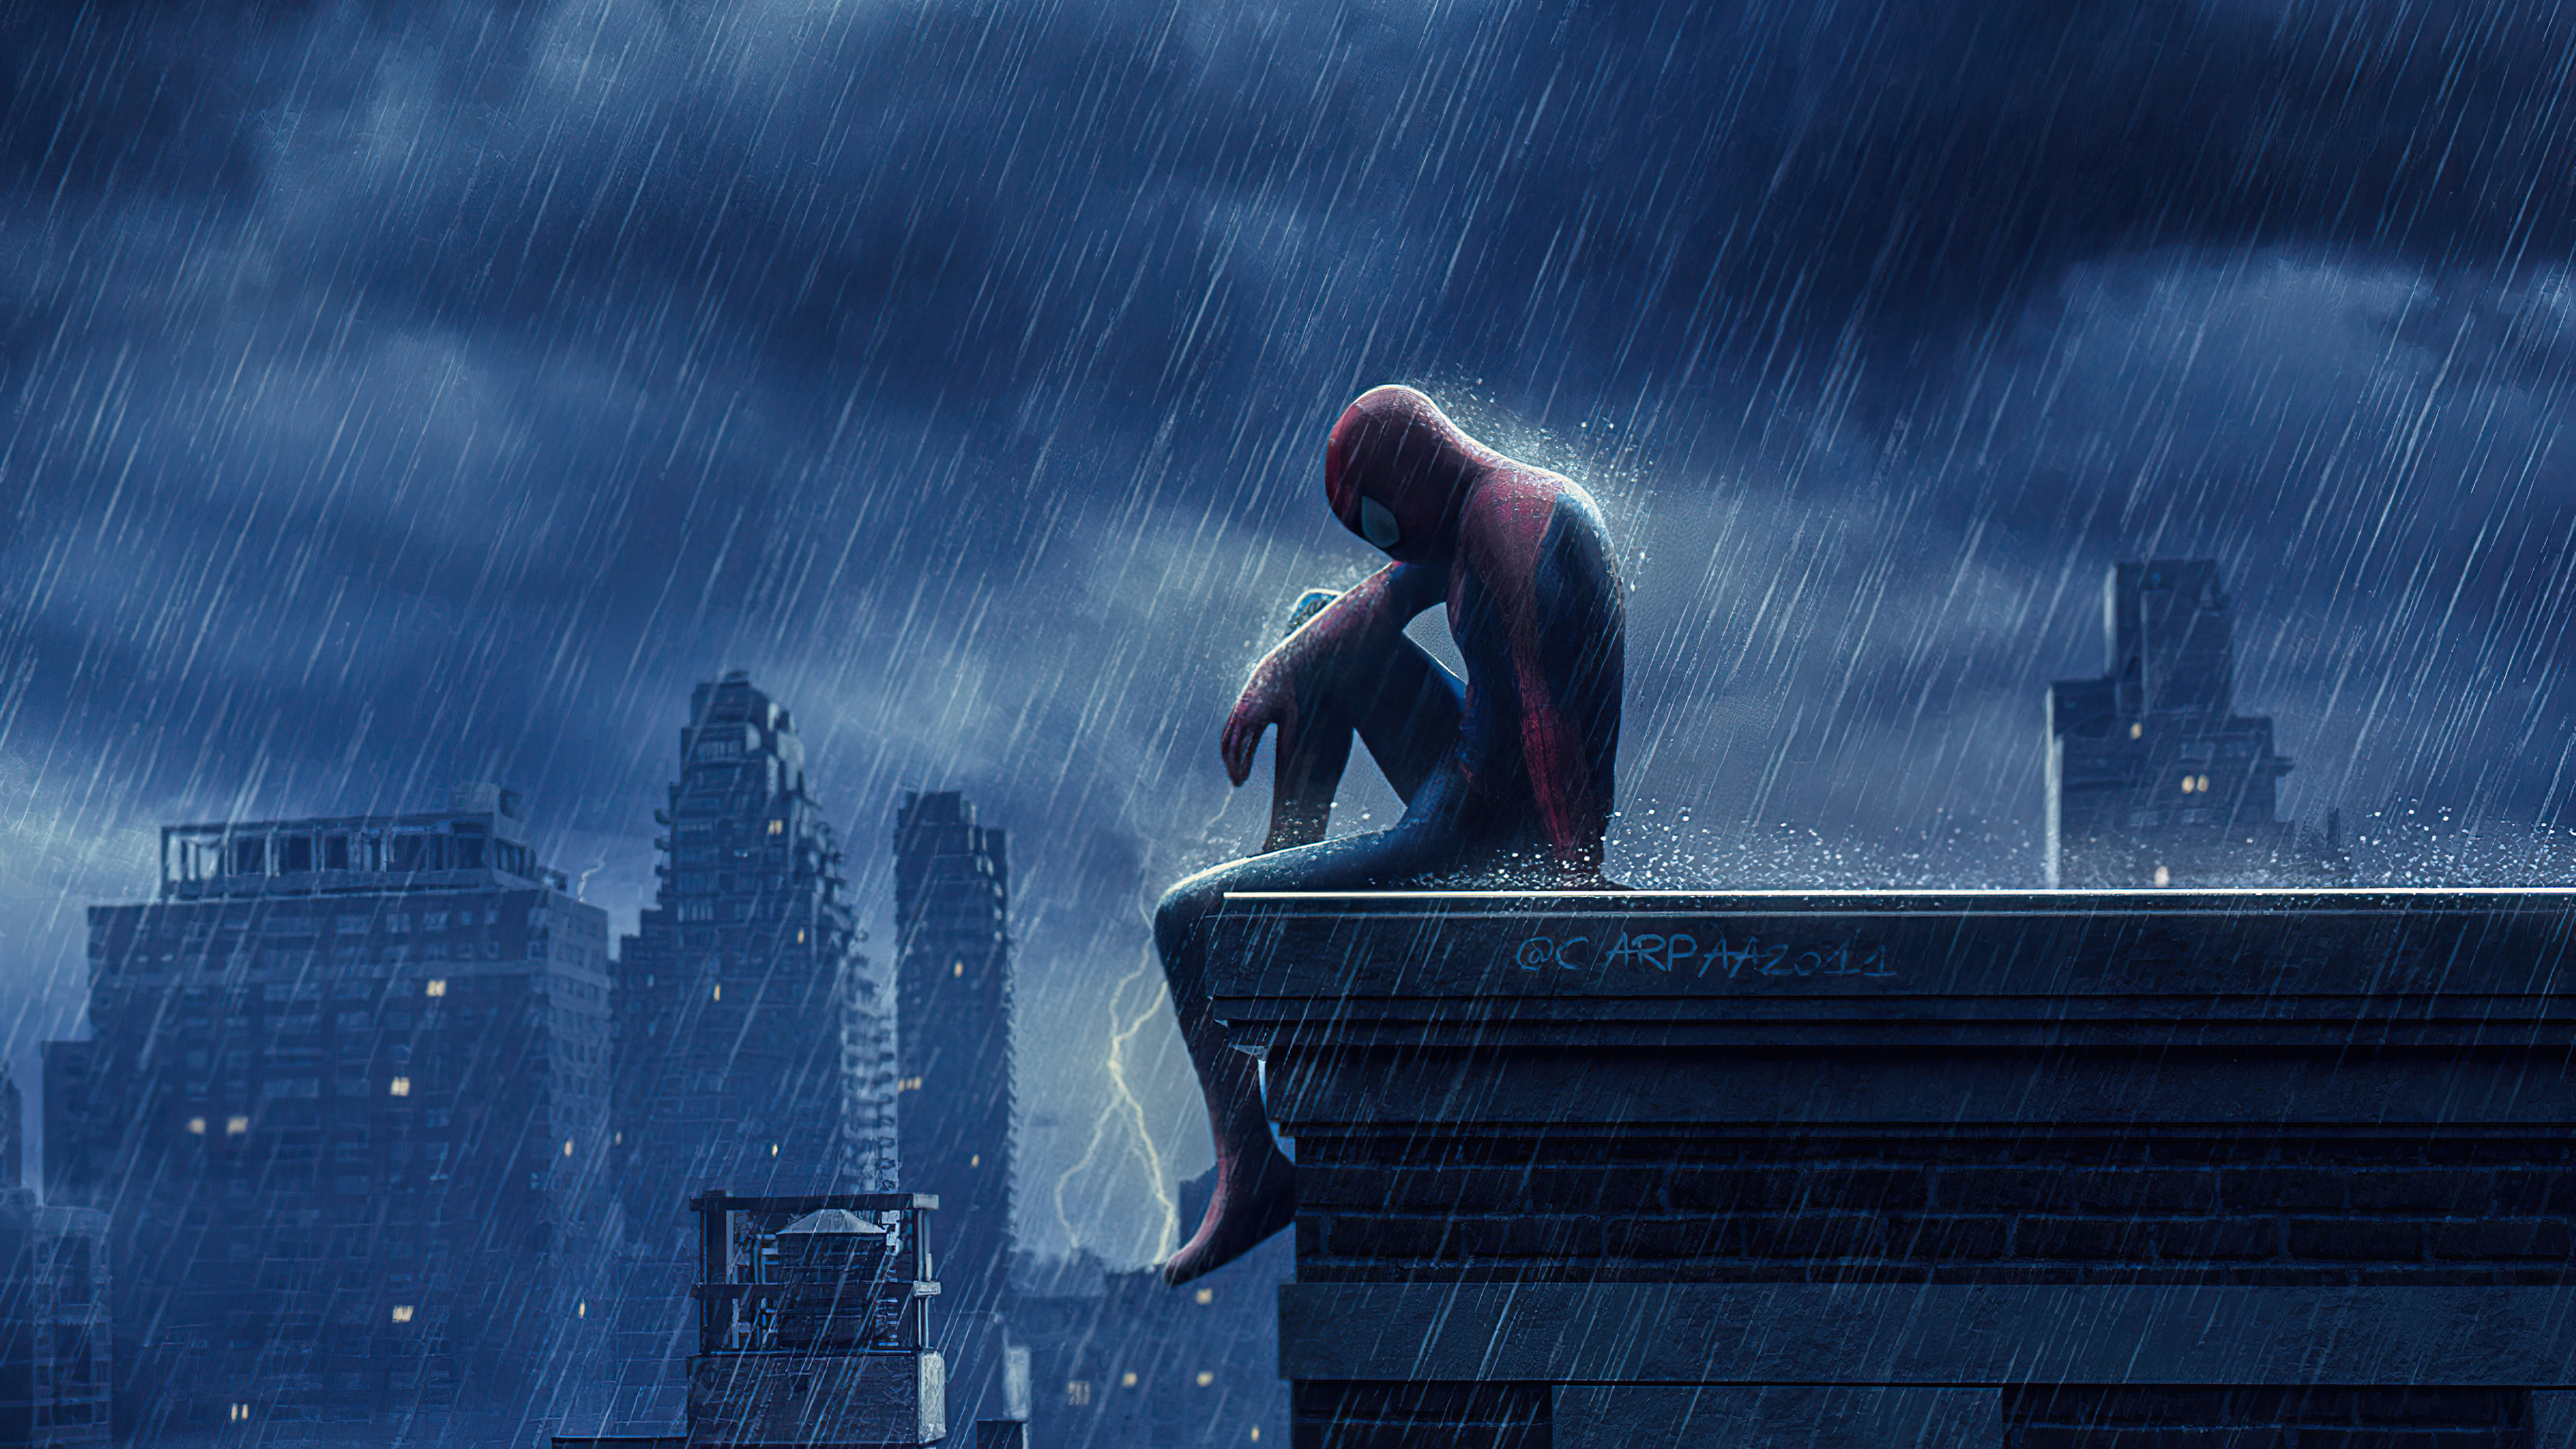 Popular Spider Man: No Way Home Image for Phone